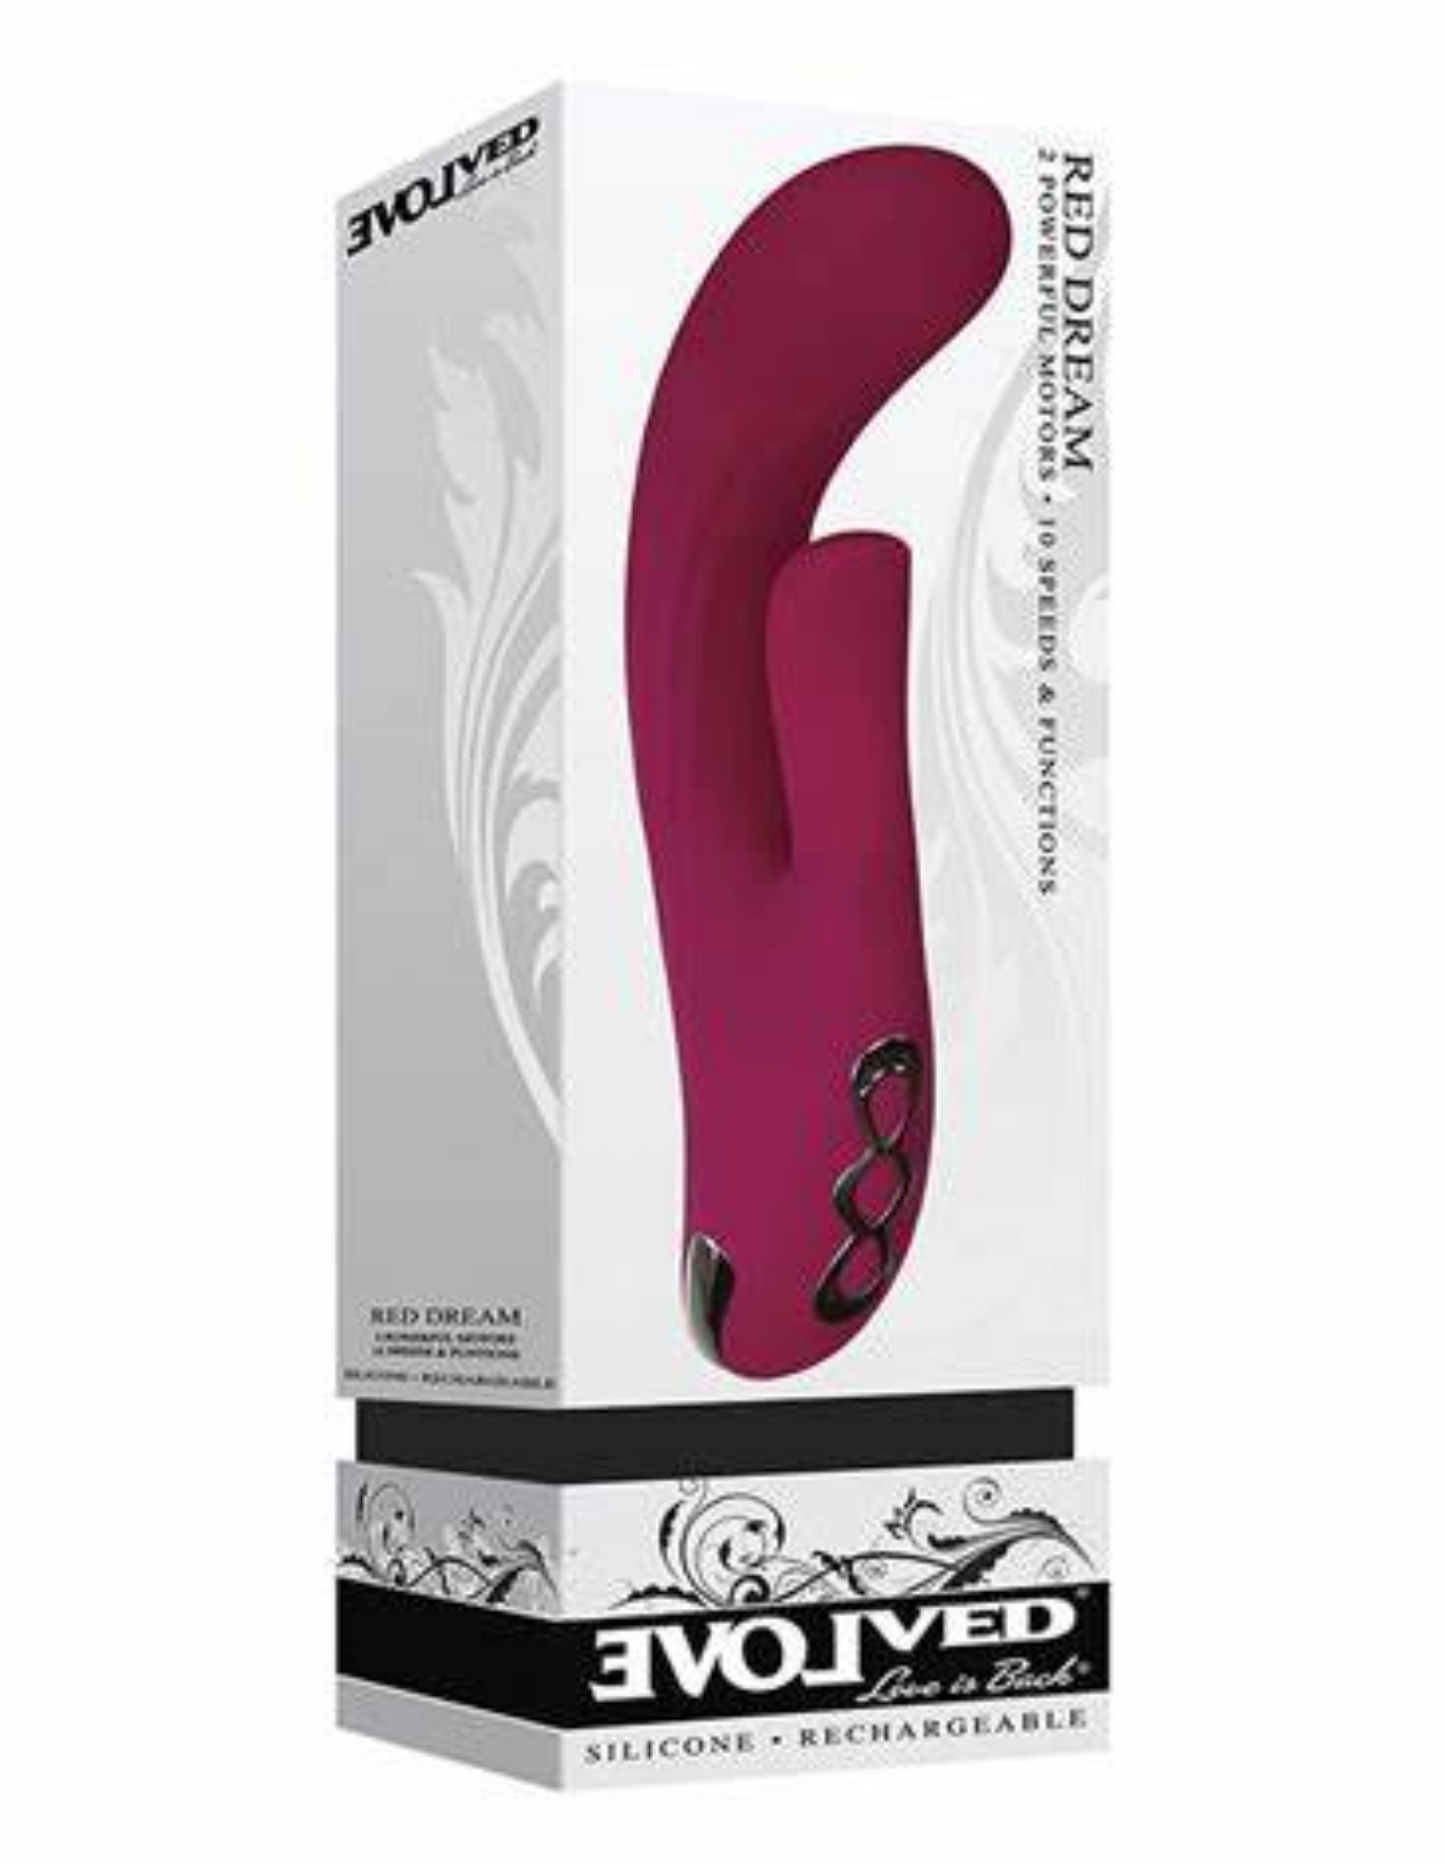 Red Dream Rechargeable Silicone Dual Stimulating Vibrator - Burgundy